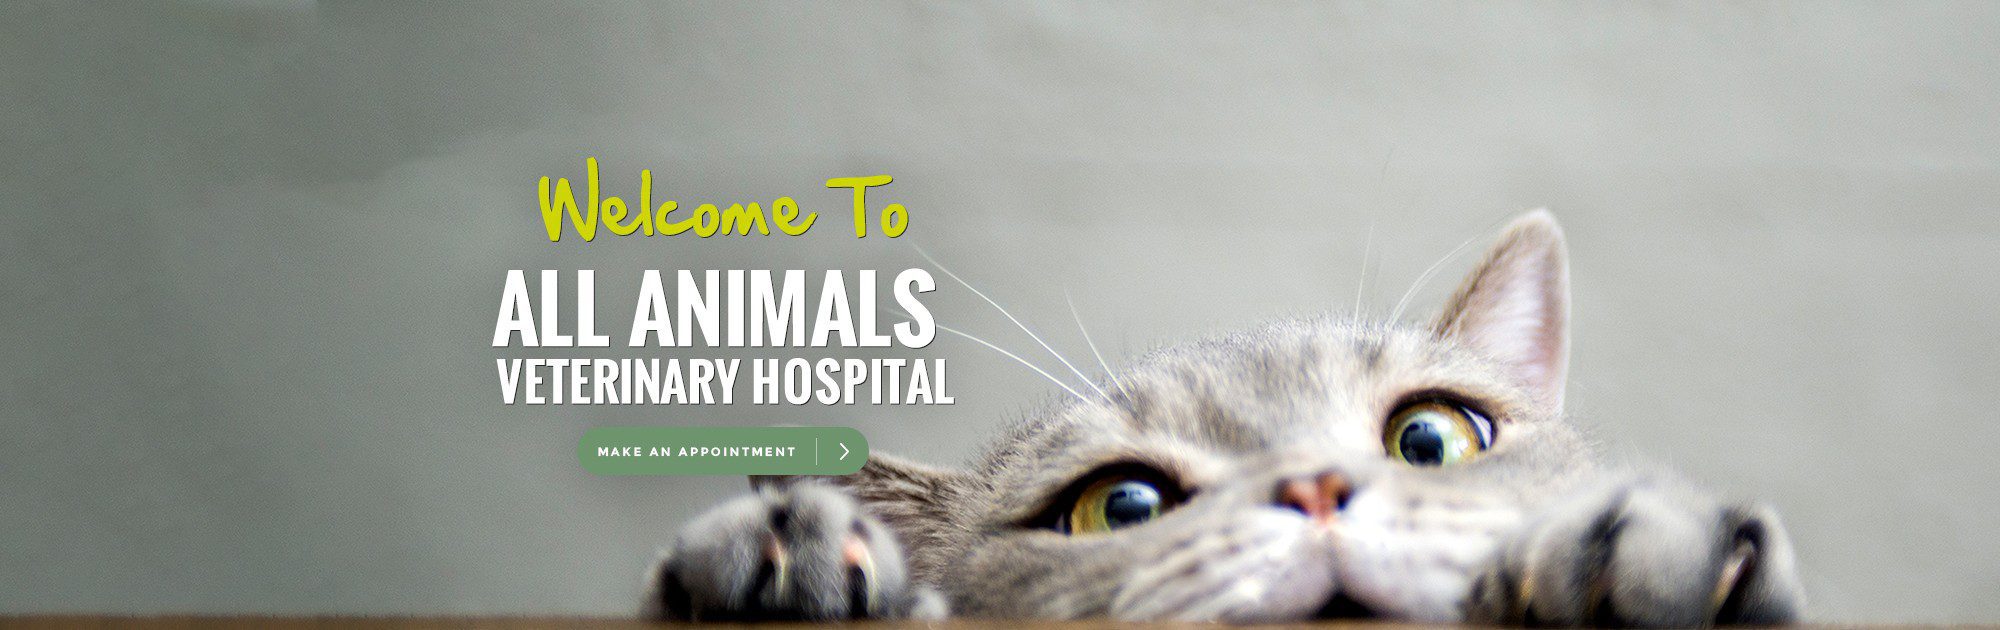 Welcome to All Animals Veterinary Hospital. Make an Appointment